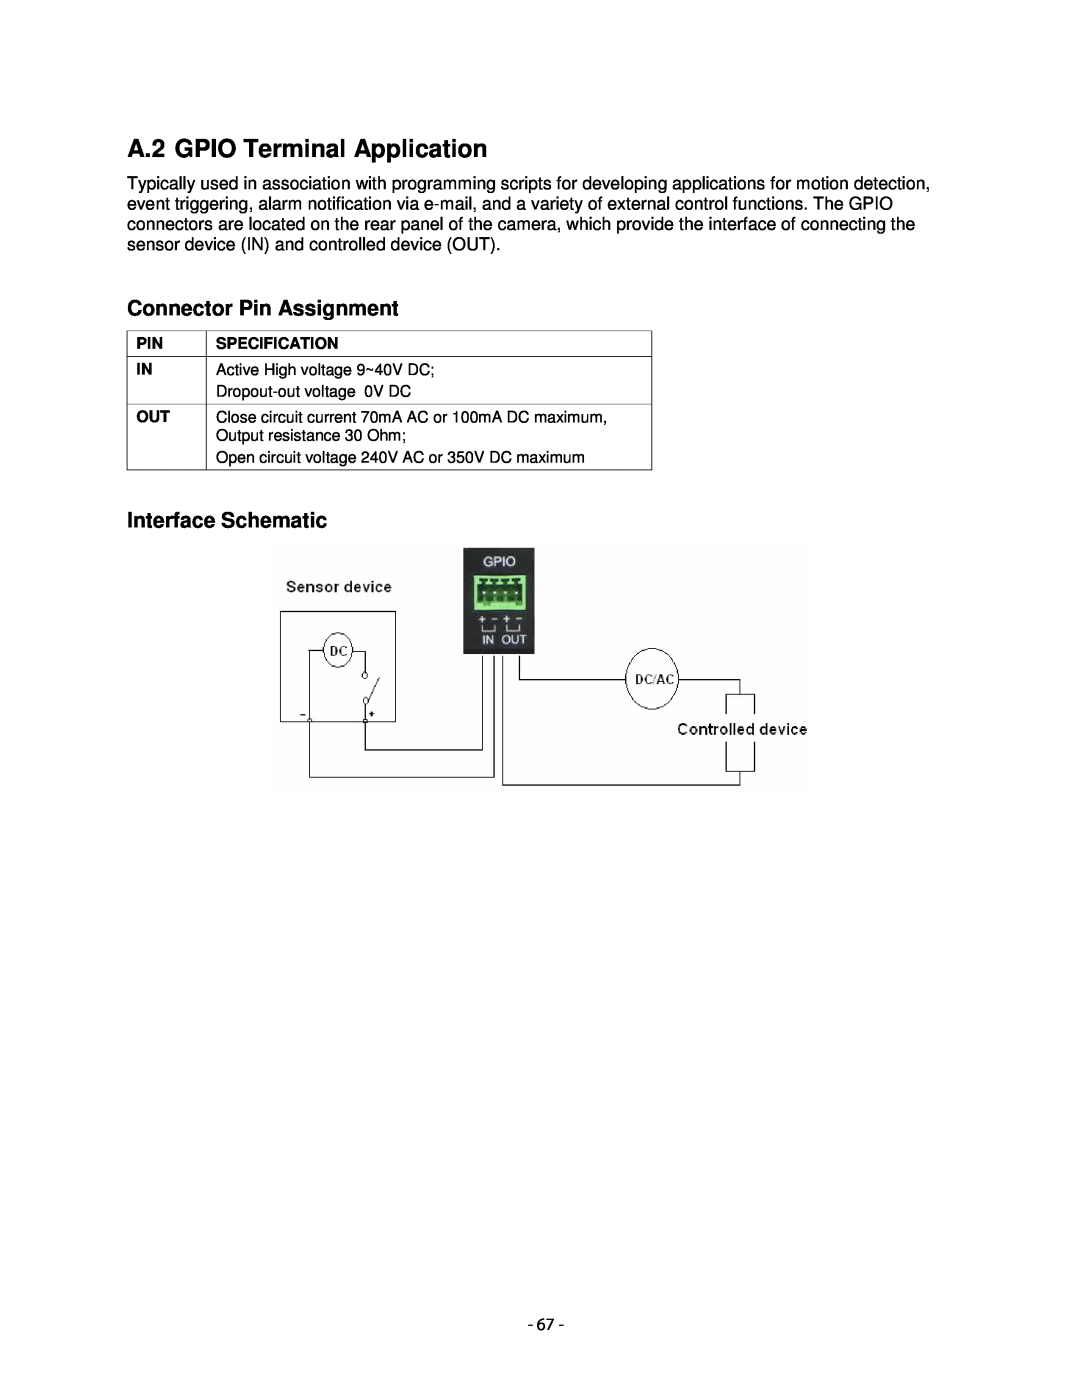 Airlink101 AICN1747W user manual A.2 GPIO Terminal Application, Connector Pin Assignment, Interface Schematic 